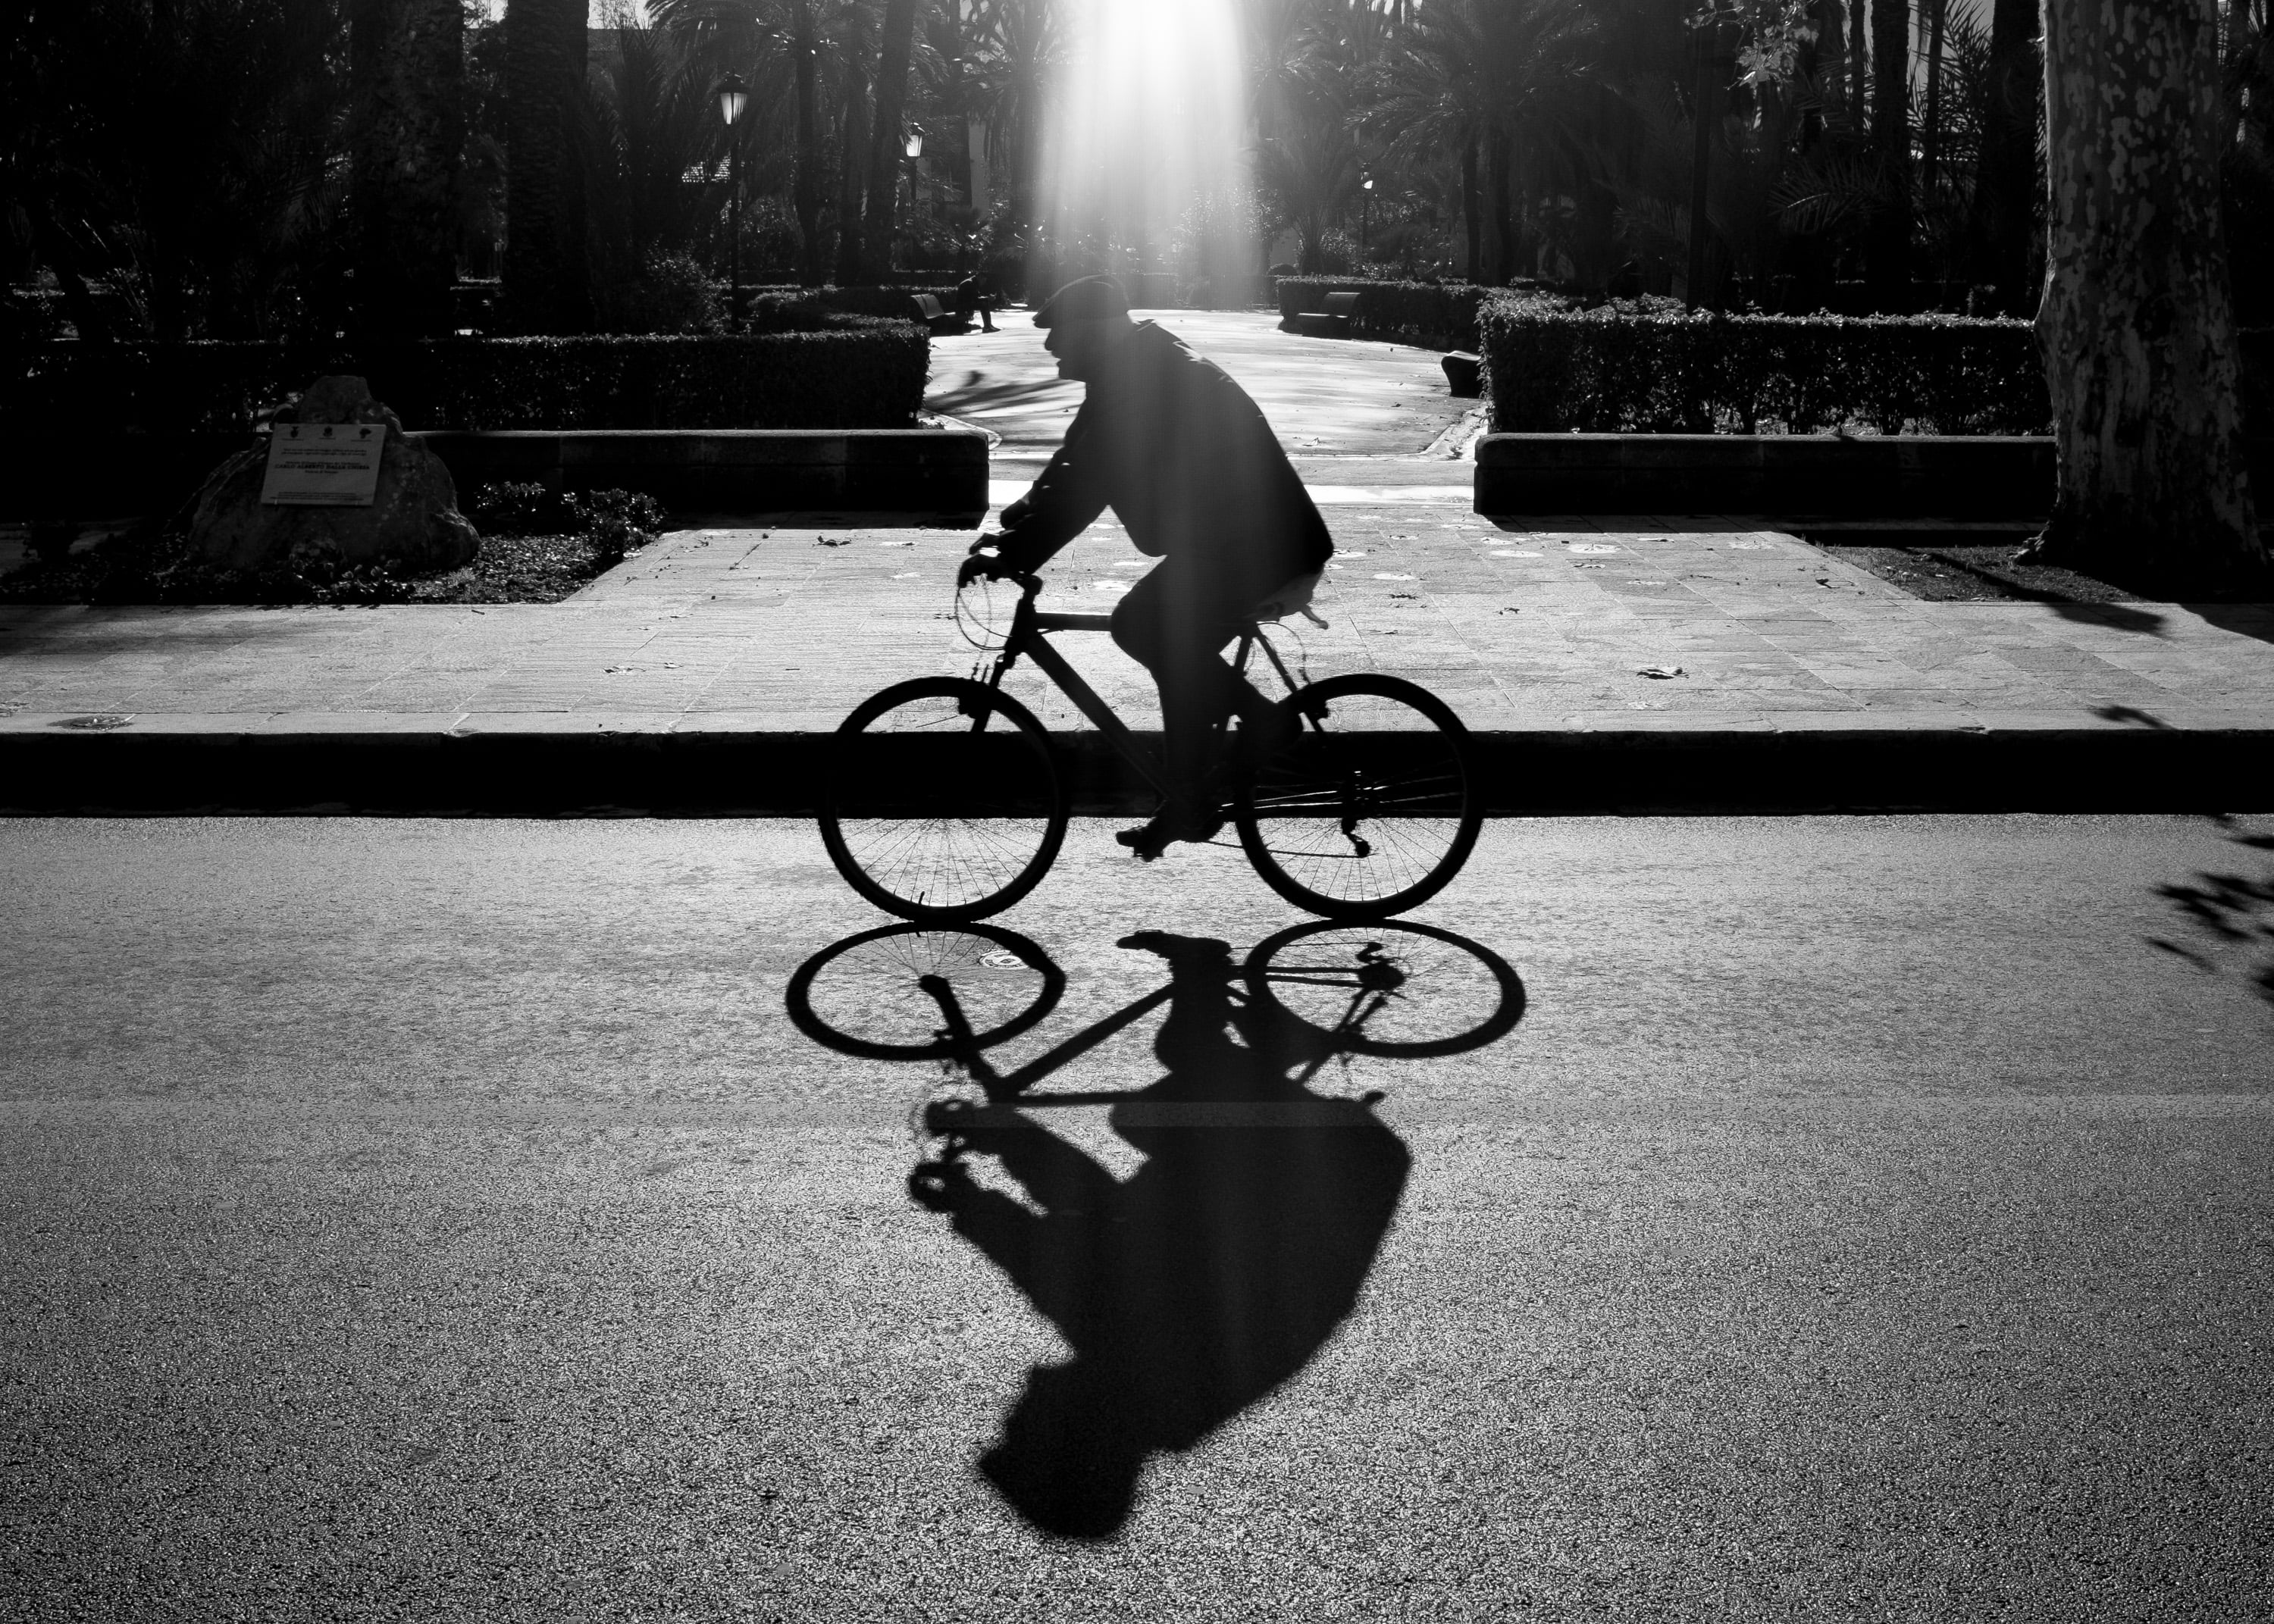 man riding on bicycle during daytime in grayscale photo, Untitled